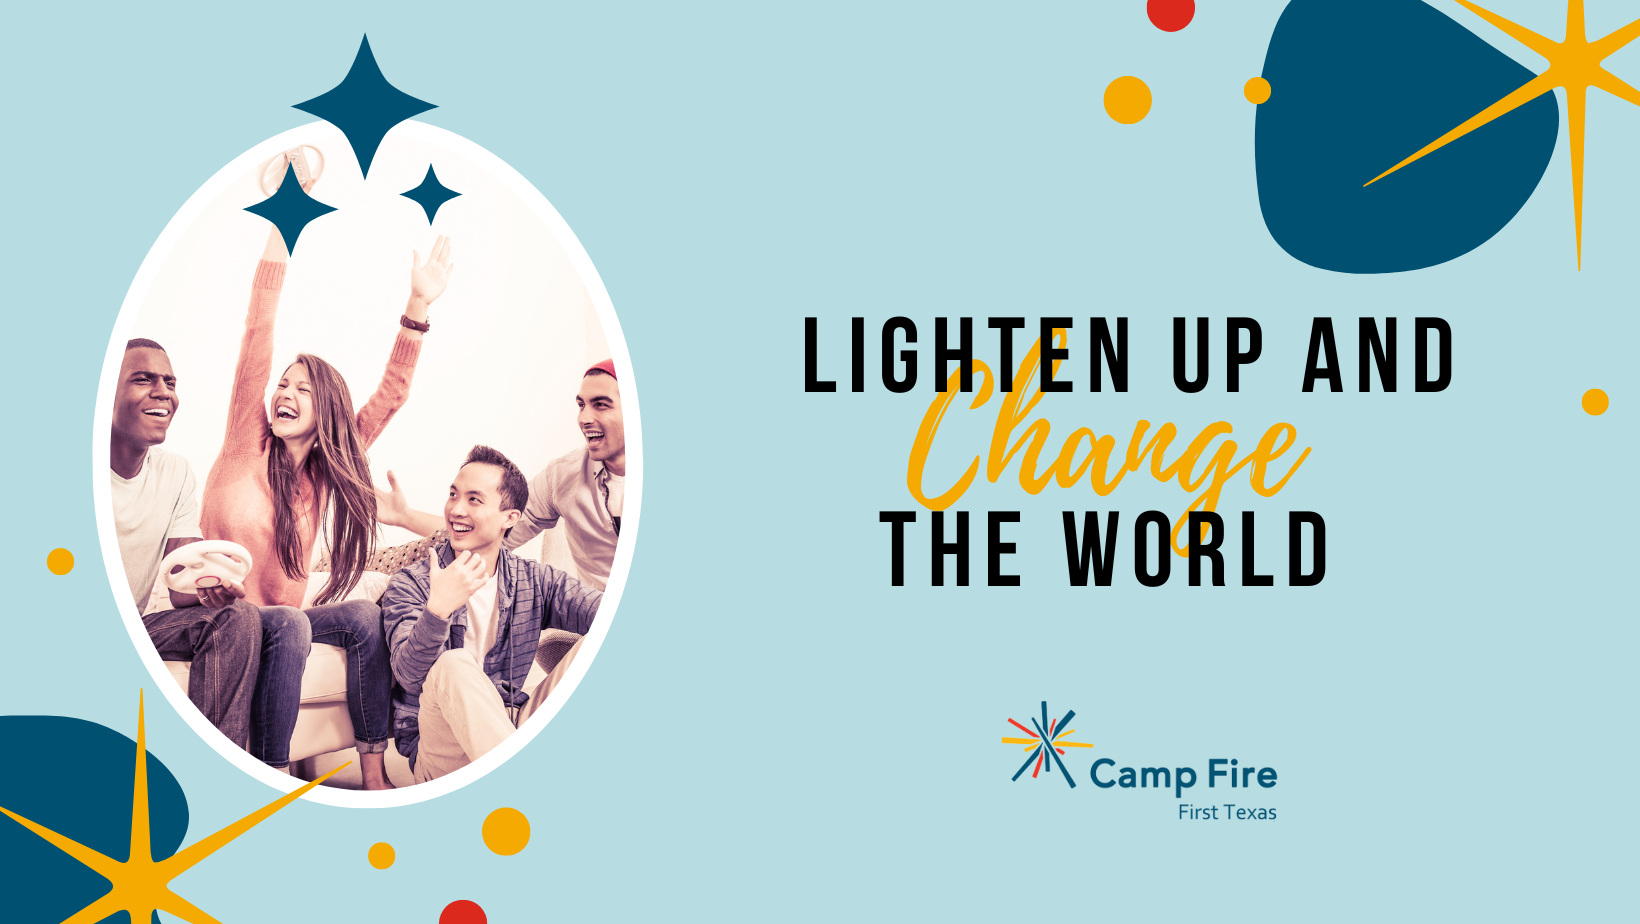 Lighten Up and Change the World, a Camp Fire First Texas blog by Lyn Lucas